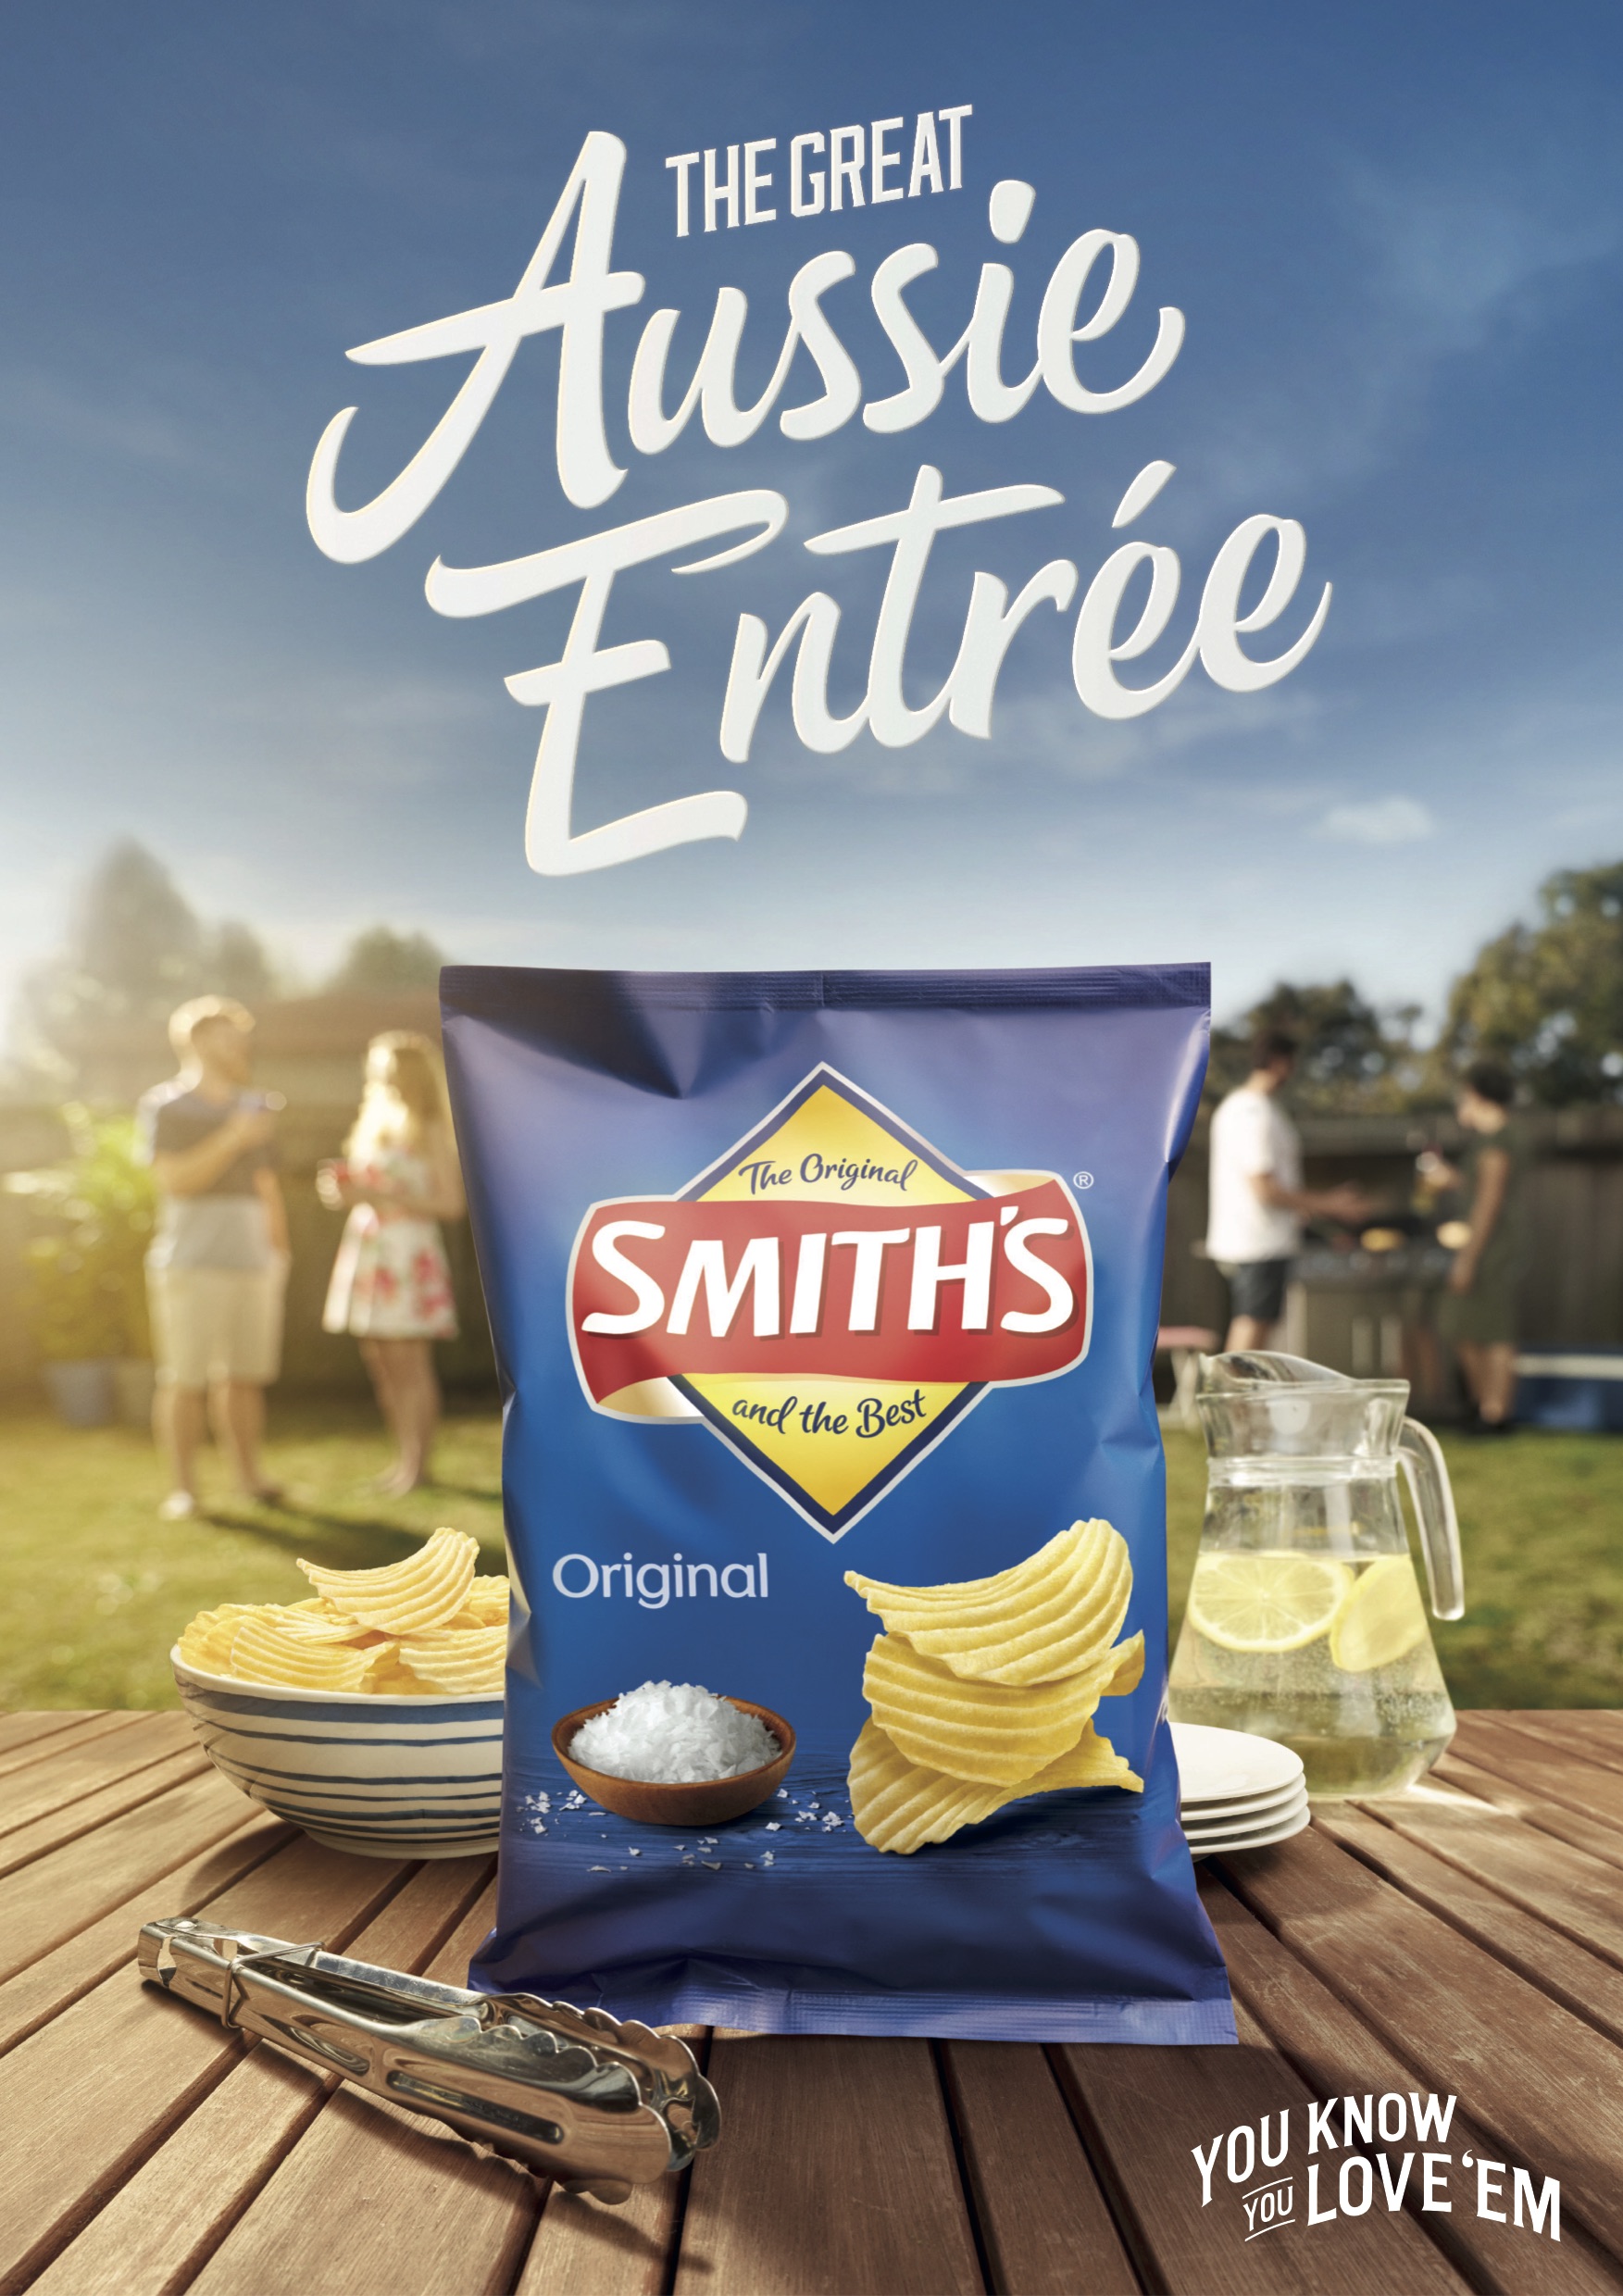 Smith's positions itself as the essential Aussie entree in new campaign